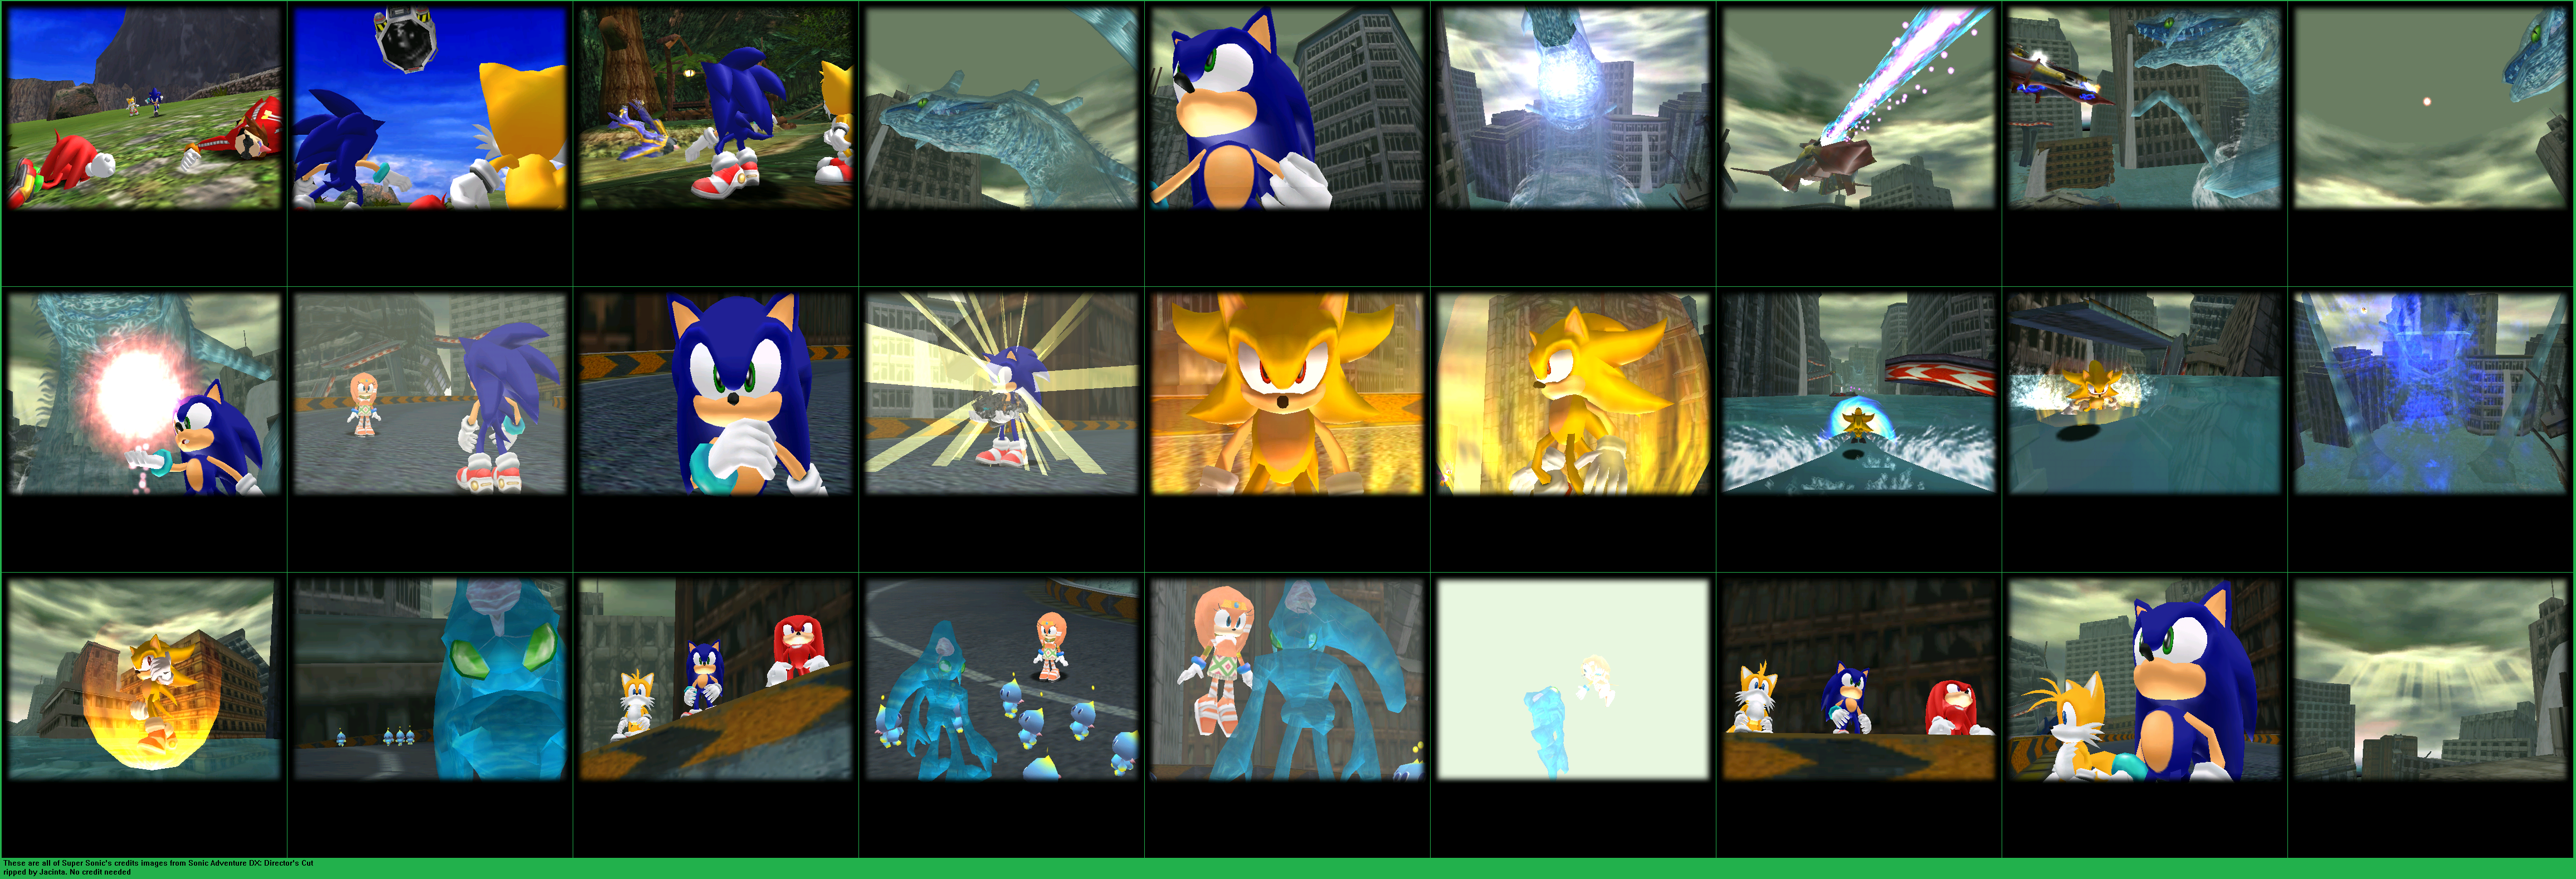 Sonic Adventure DX: Director's Cut - Credits Images (Super Sonic)